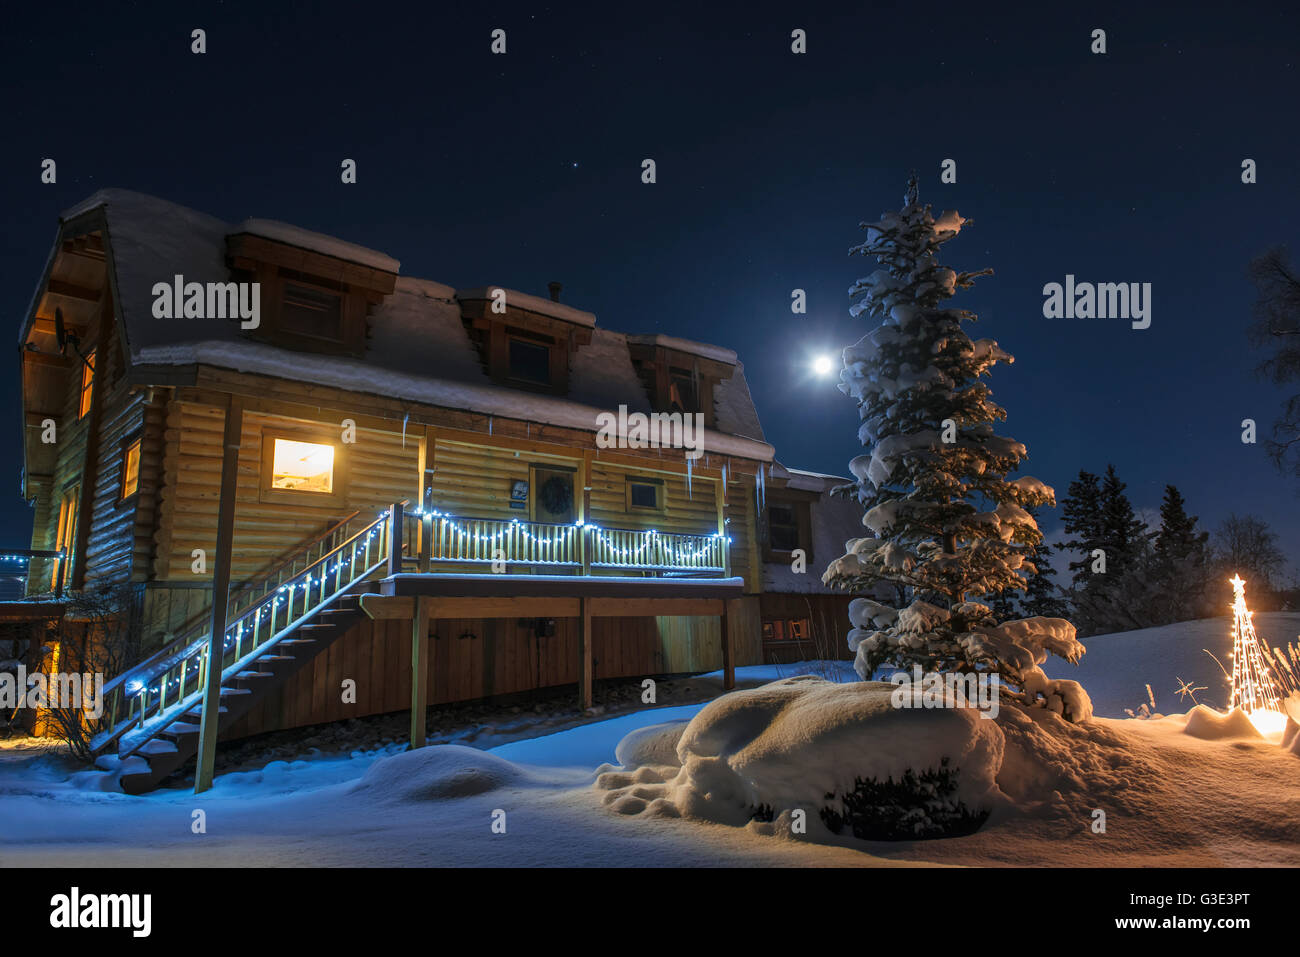 Full moon and holiday lights brighten up a wintery night at a log home in Anchorage, South-central Alaska Stock Photo